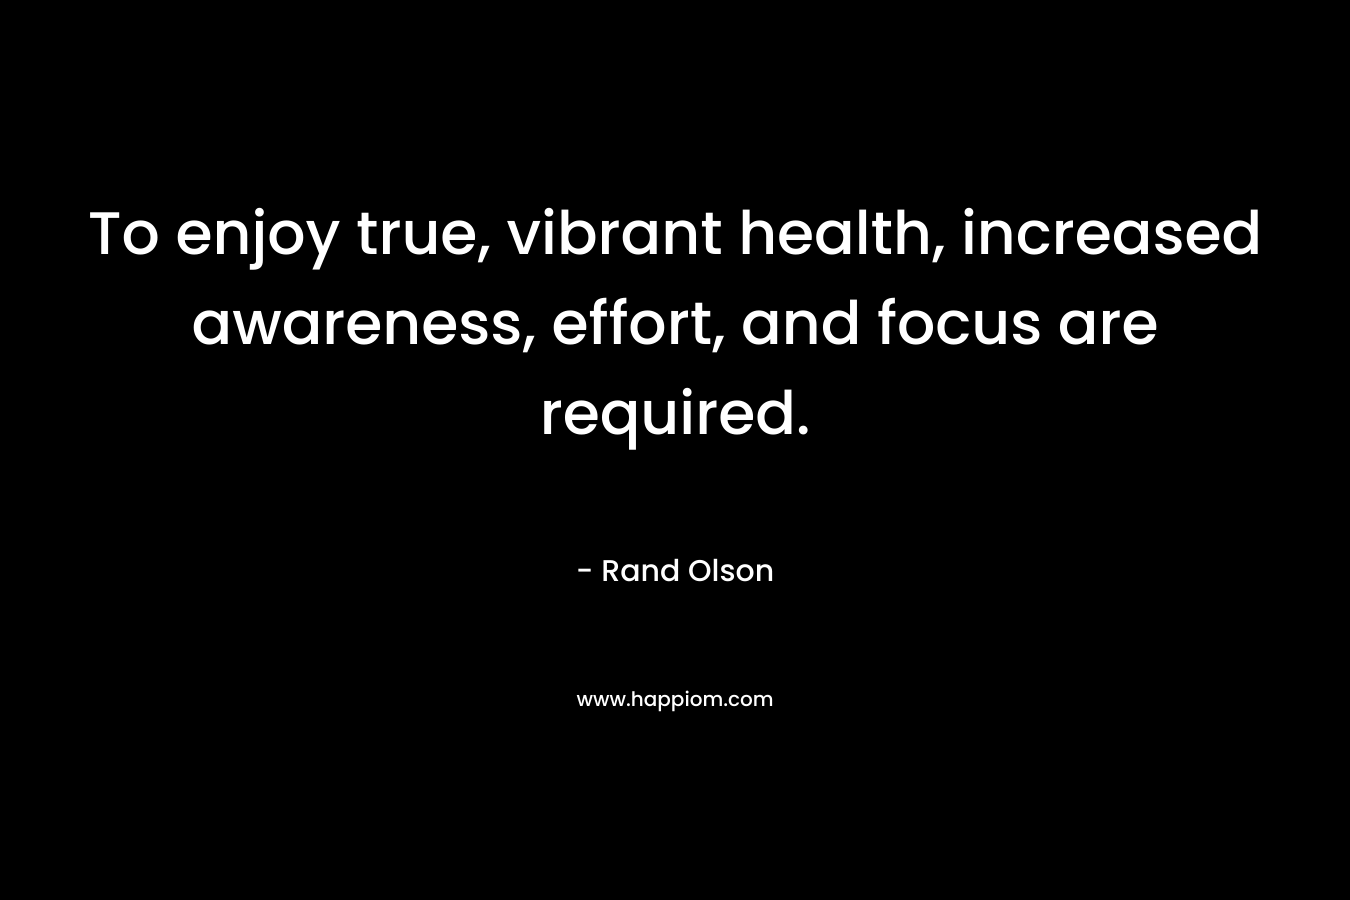 To enjoy true, vibrant health, increased awareness, effort, and focus are required.